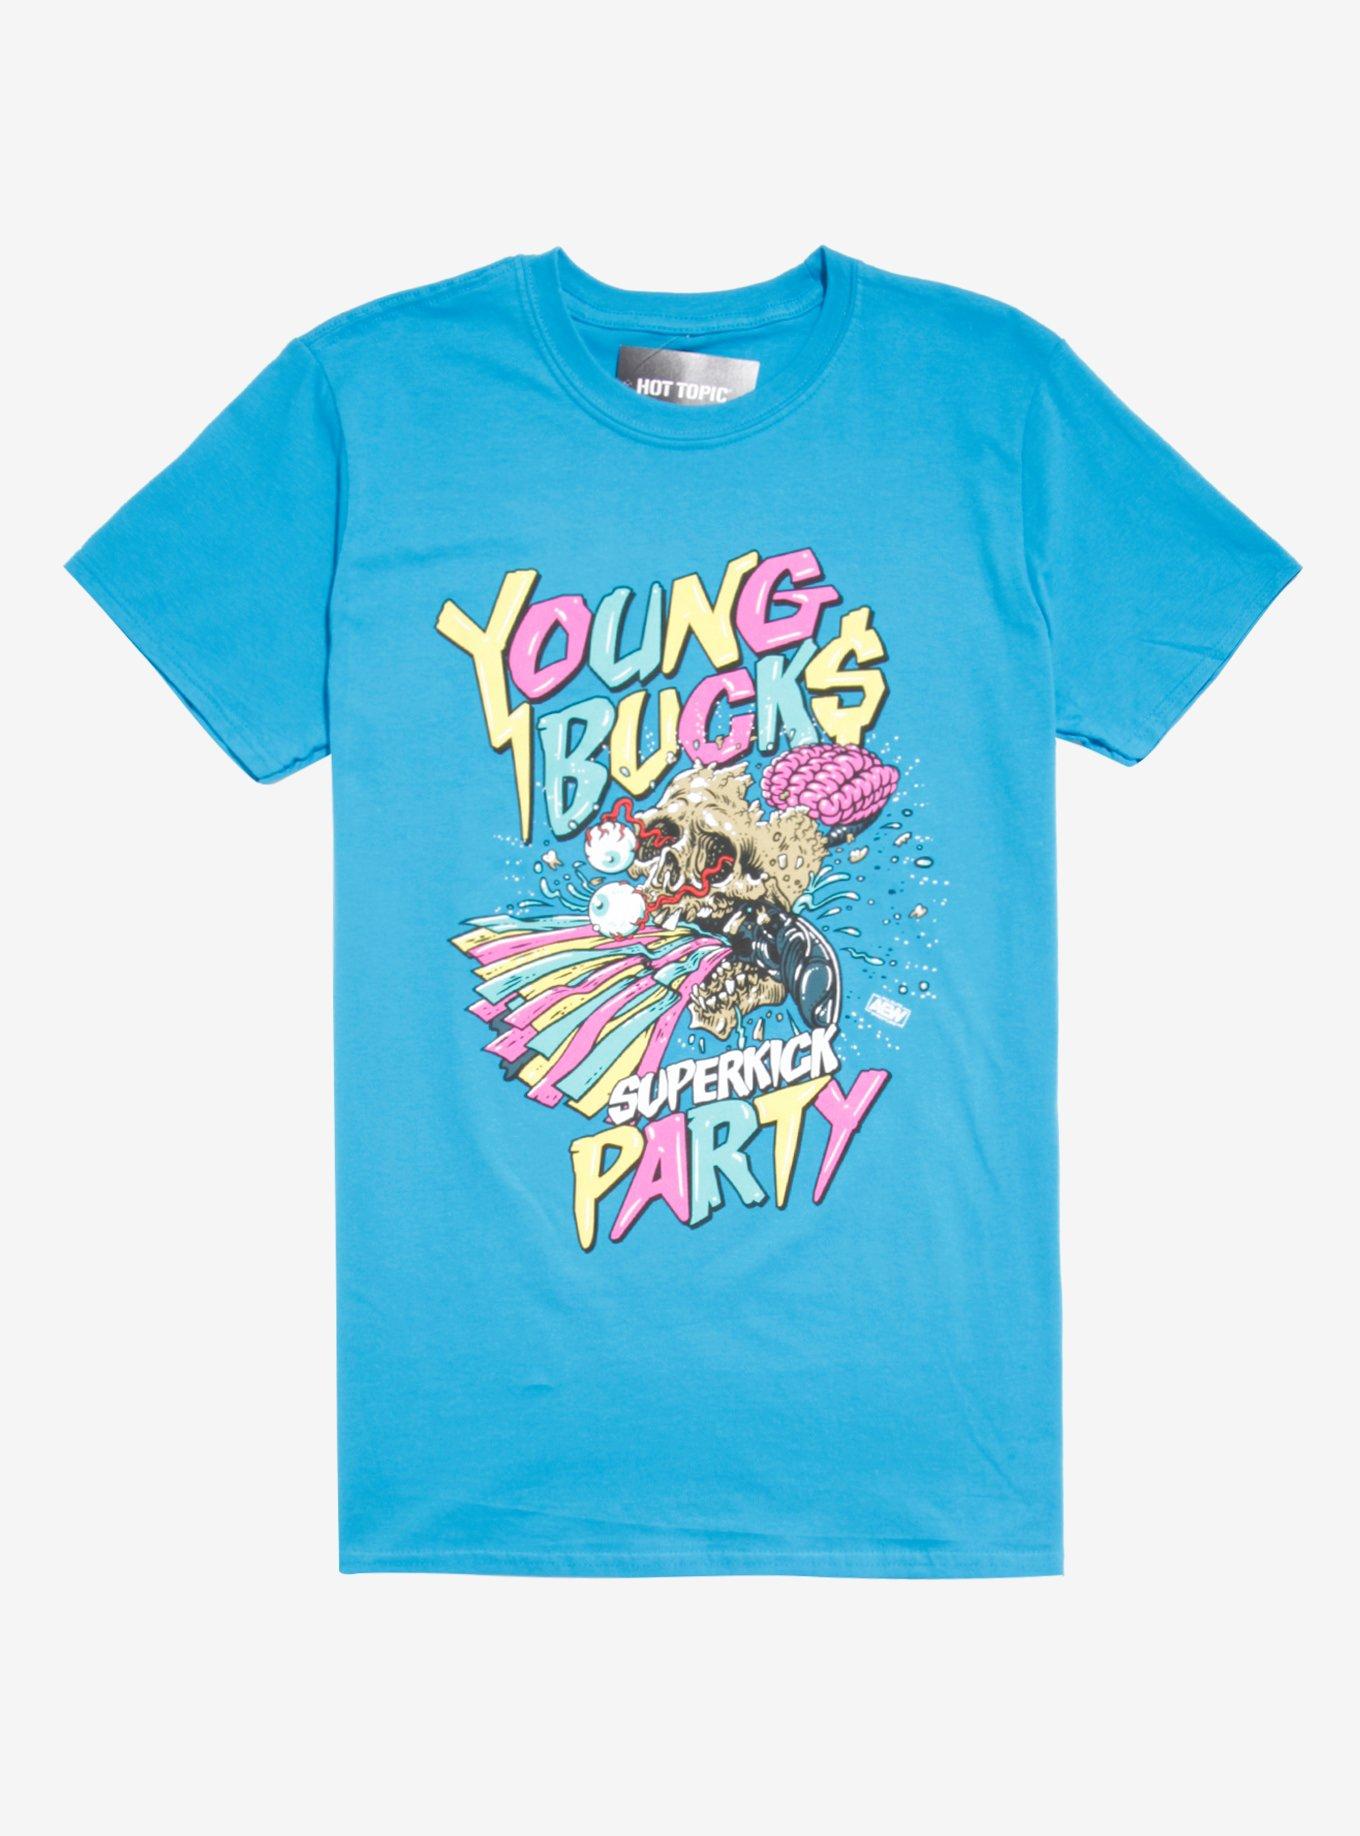 All Elite Wrestling The Young Bucks Superkick Party T-Shirt | Hot Topic